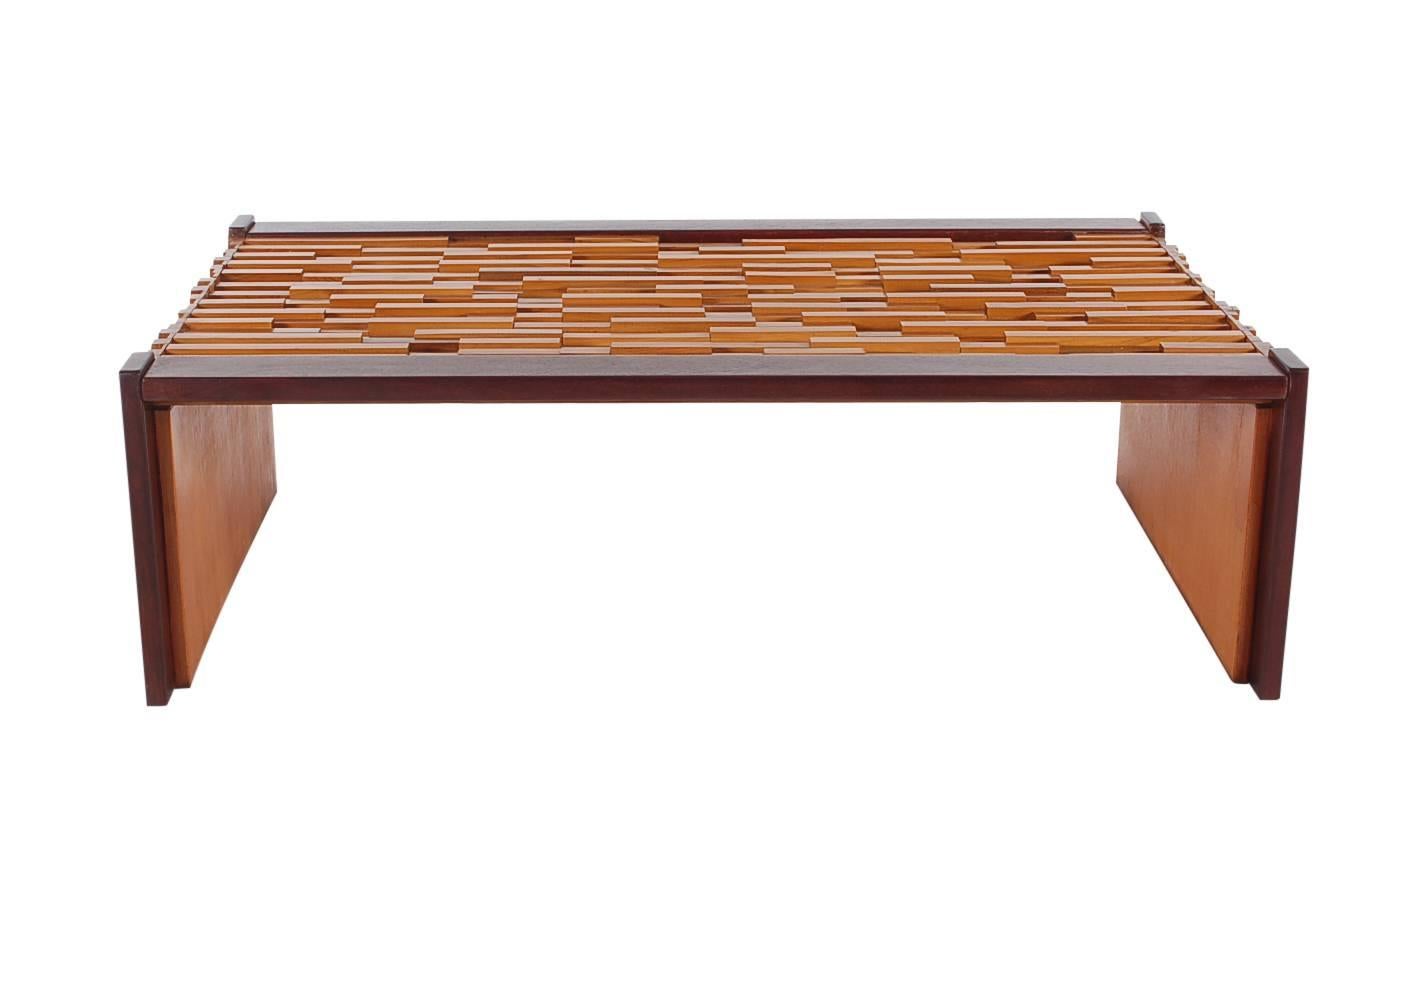 A classic Brazilian design by Percival Lafer. It features mixed wood blocks with rosewood edges and glass top. Excellent well cared for condition.